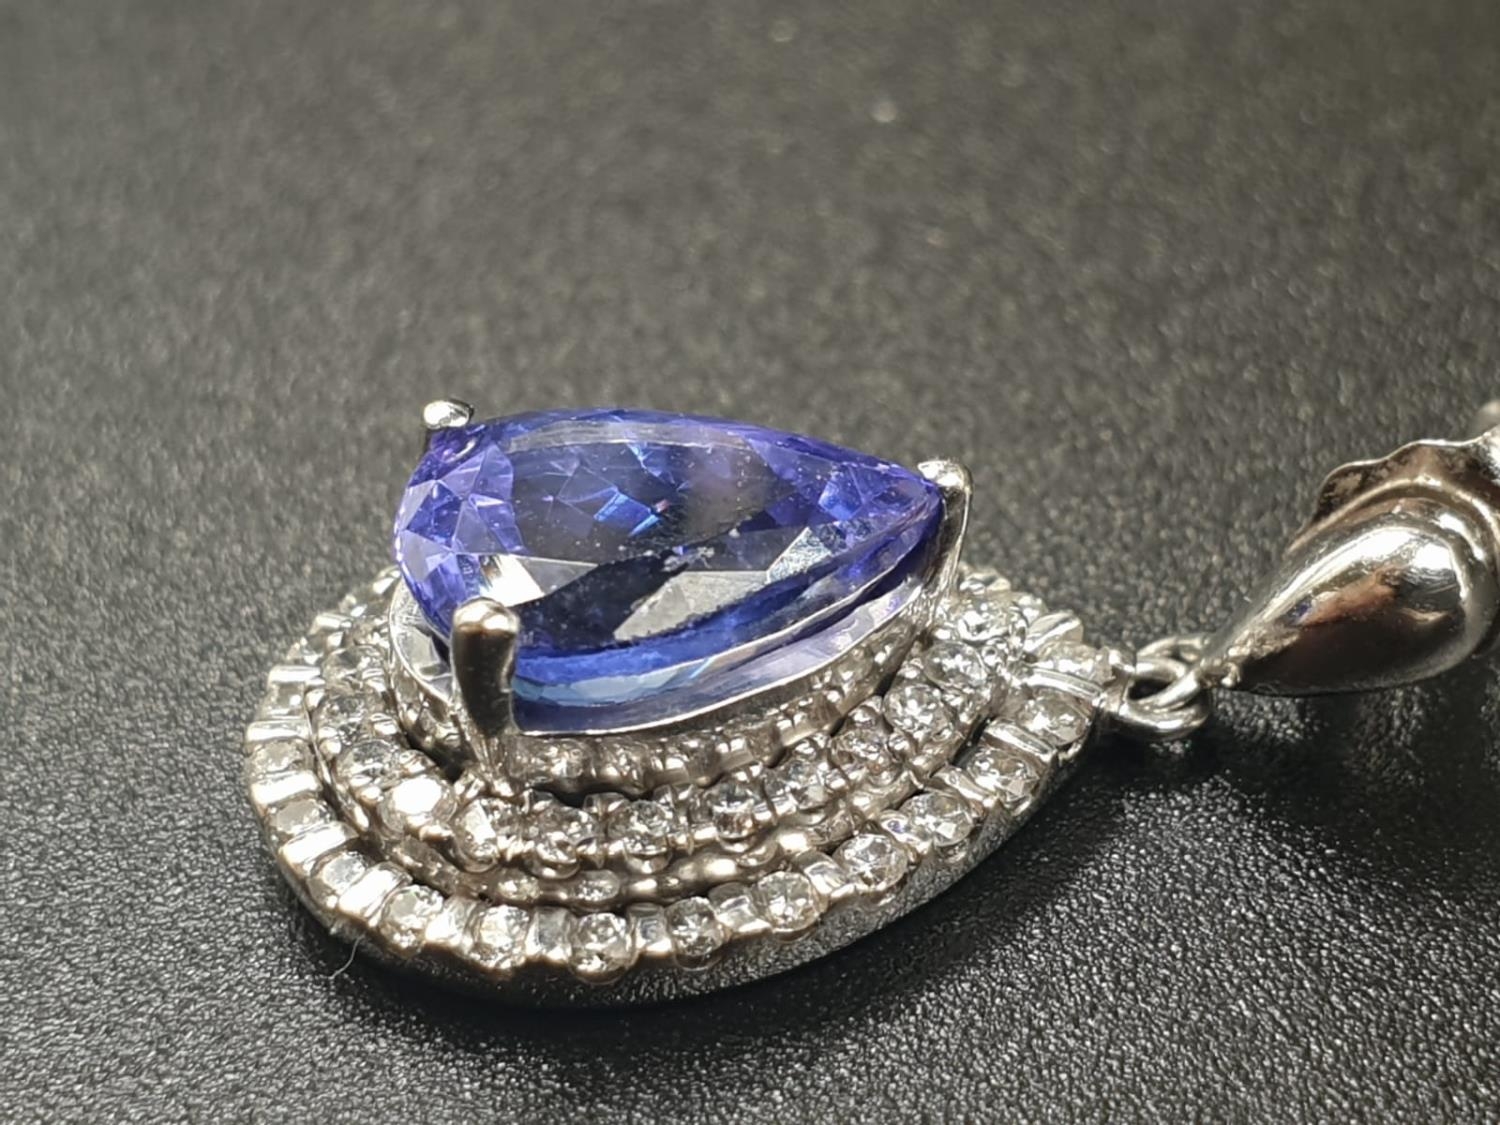 A 14CT WHITE GOLD MATCHING SET OF EARRINGS AND DRESS RING WITH LARGE PEAR SHAPED TANZANITE STONES - Image 10 of 14